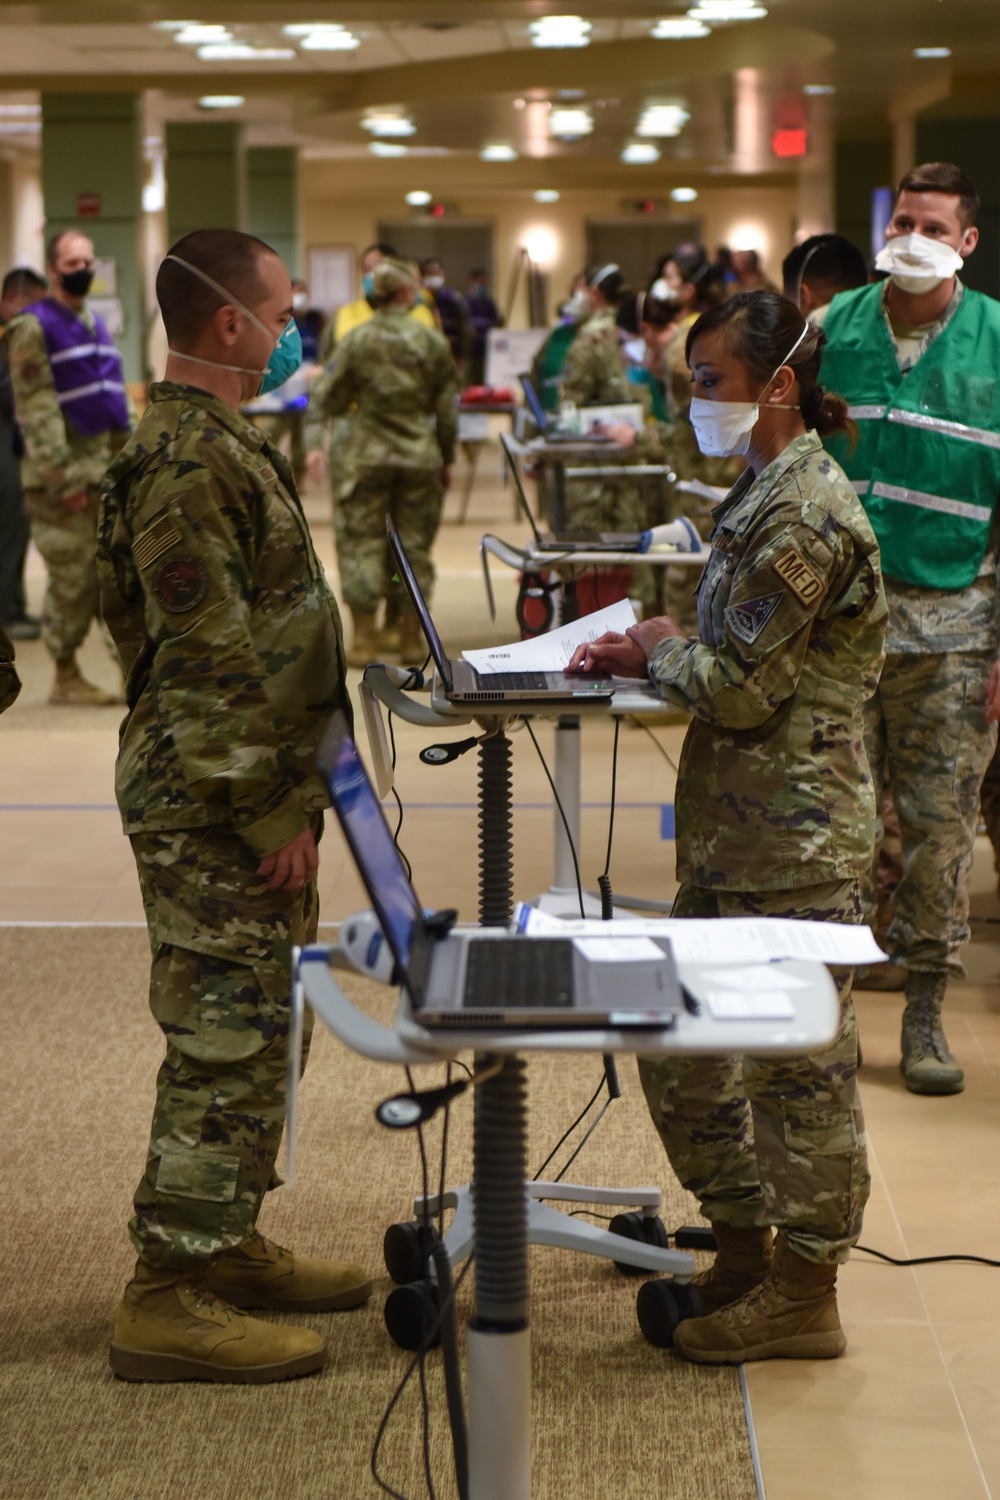 Initial COVID-19 vaccinations underway at Vandenberg AFB